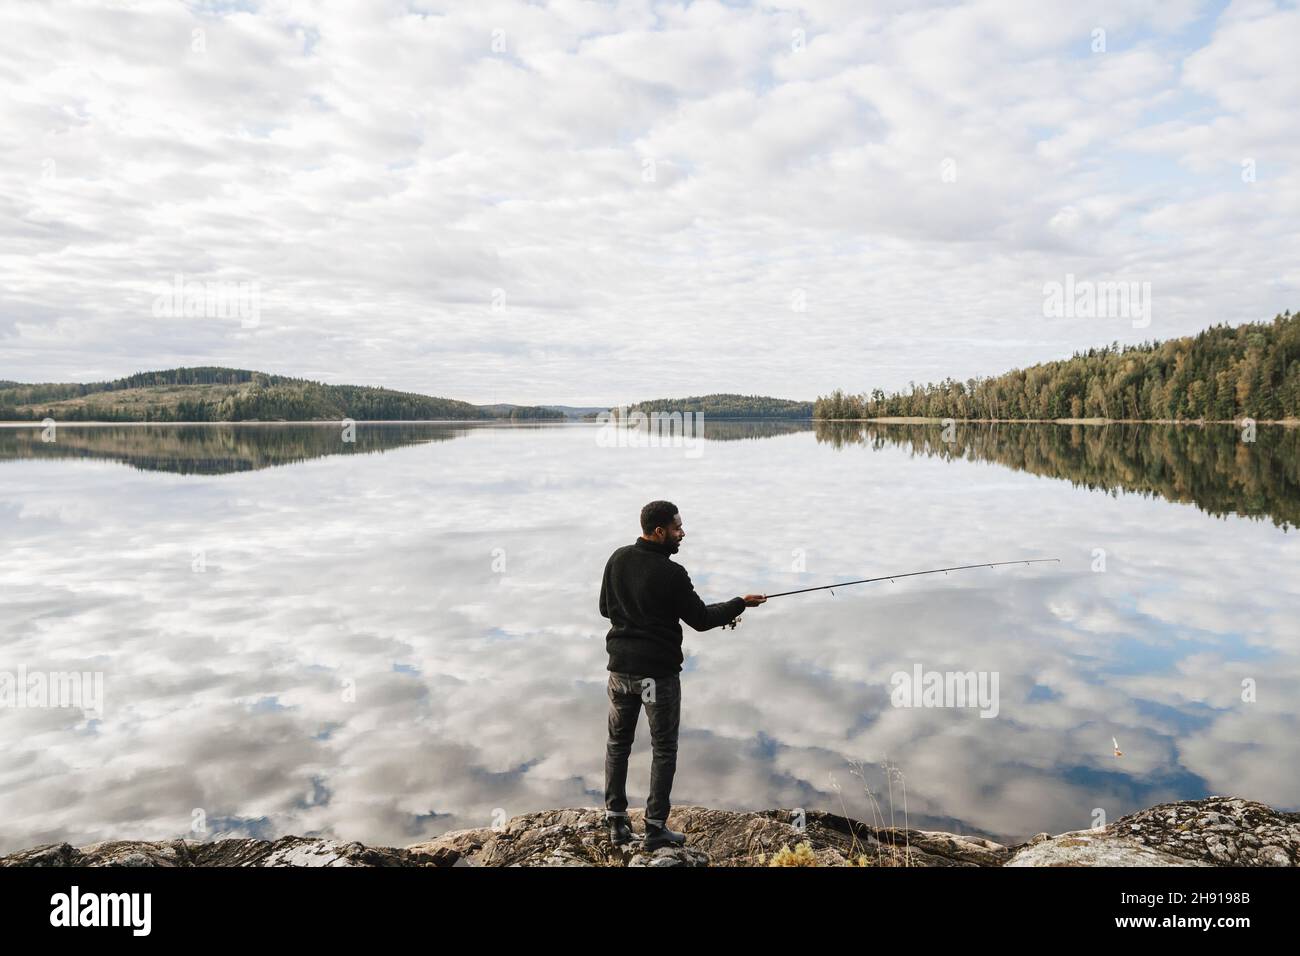 Full length rear view of man fishing in lake with reflection of clouds Stock Photo